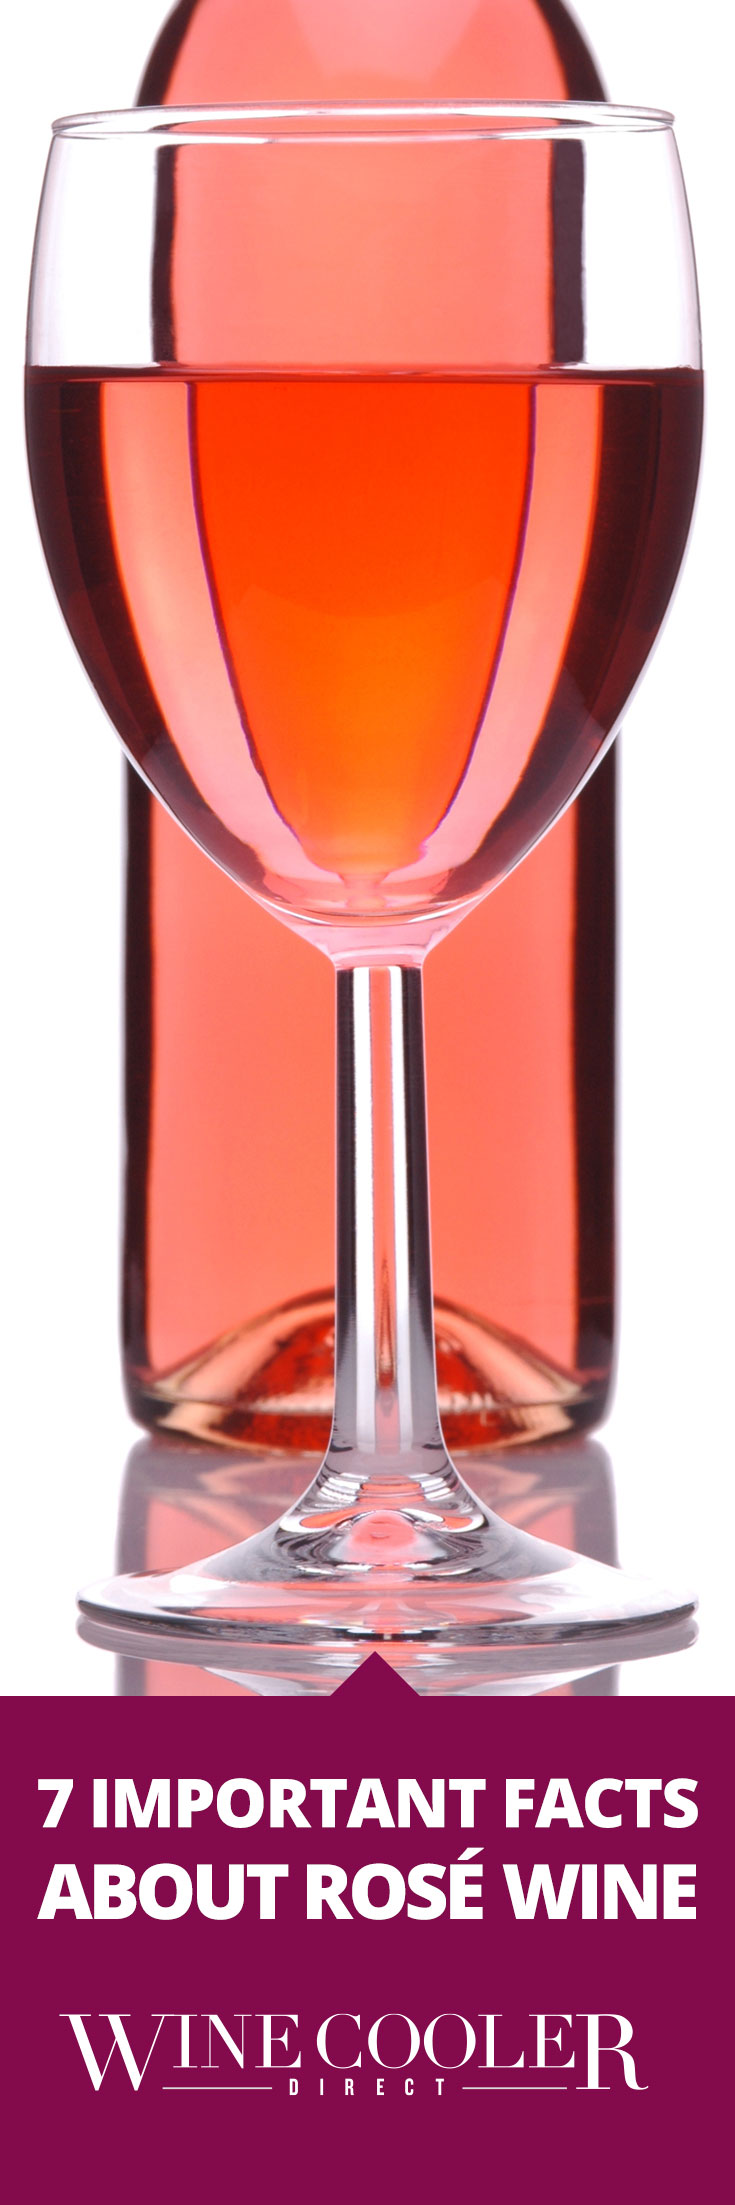 Rose bottle and glass pin